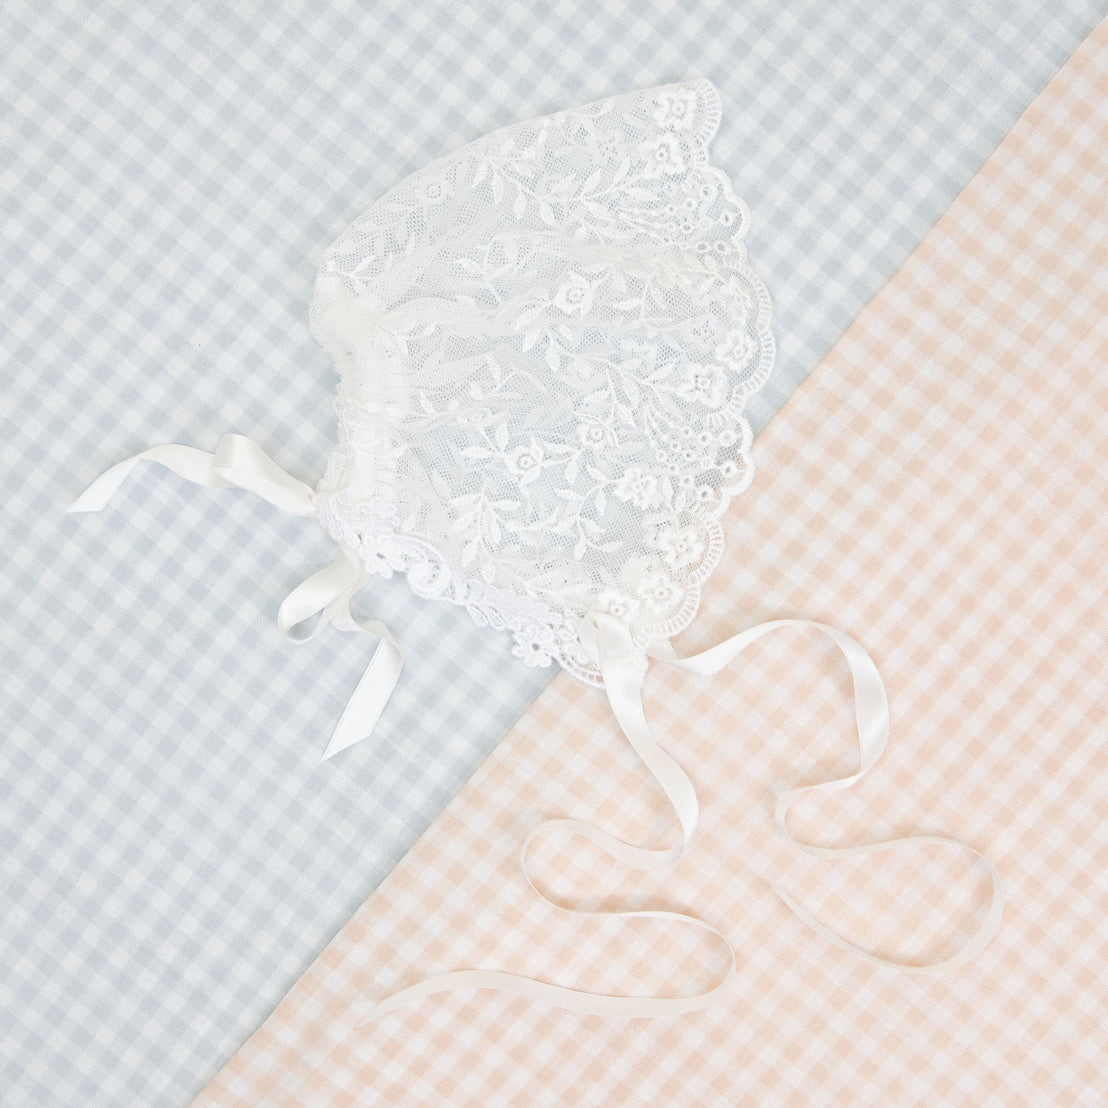 A delicate Isla Lace Bonnet with satin ribbon ties, ideal for a newborn, displayed on a pastel blue and peach checkered background.